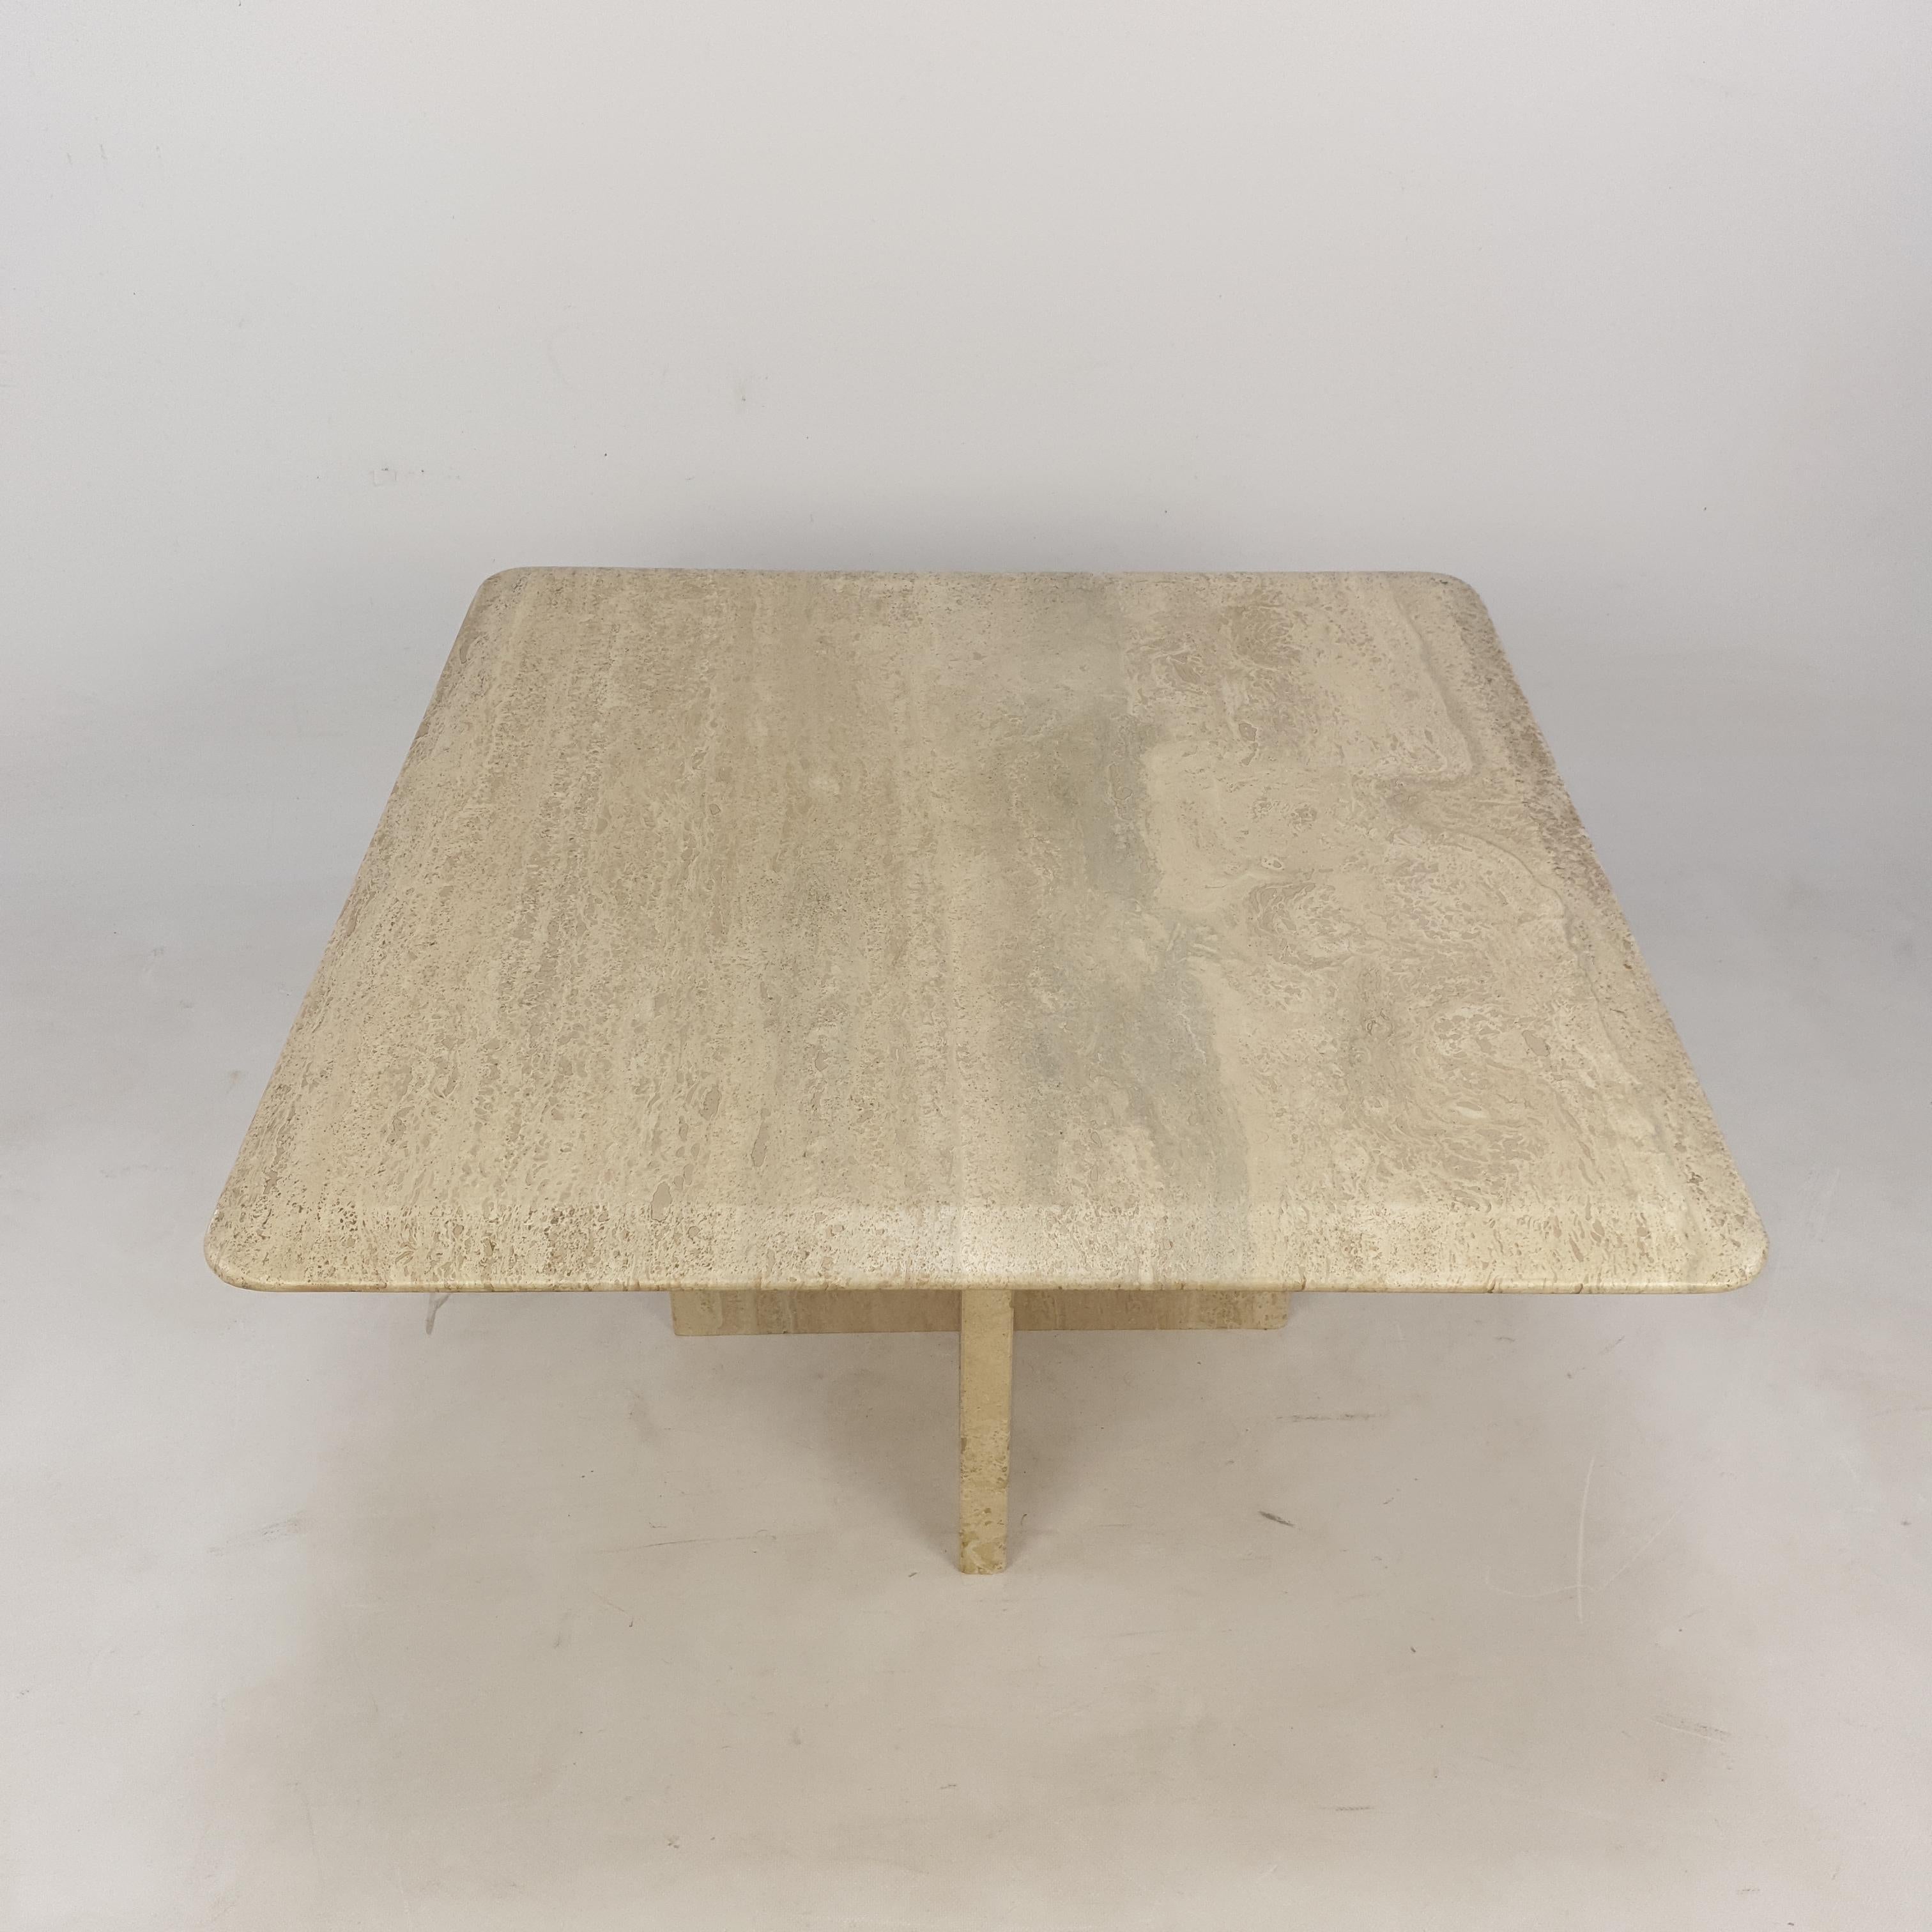 A very nice Italian coffee table of the 80,s, handcrafted out of travertine. The top is rounded on the edge. The base is made of two separate pieces. This vintage marble cocktail table will make the perfect addition to any seating or living room